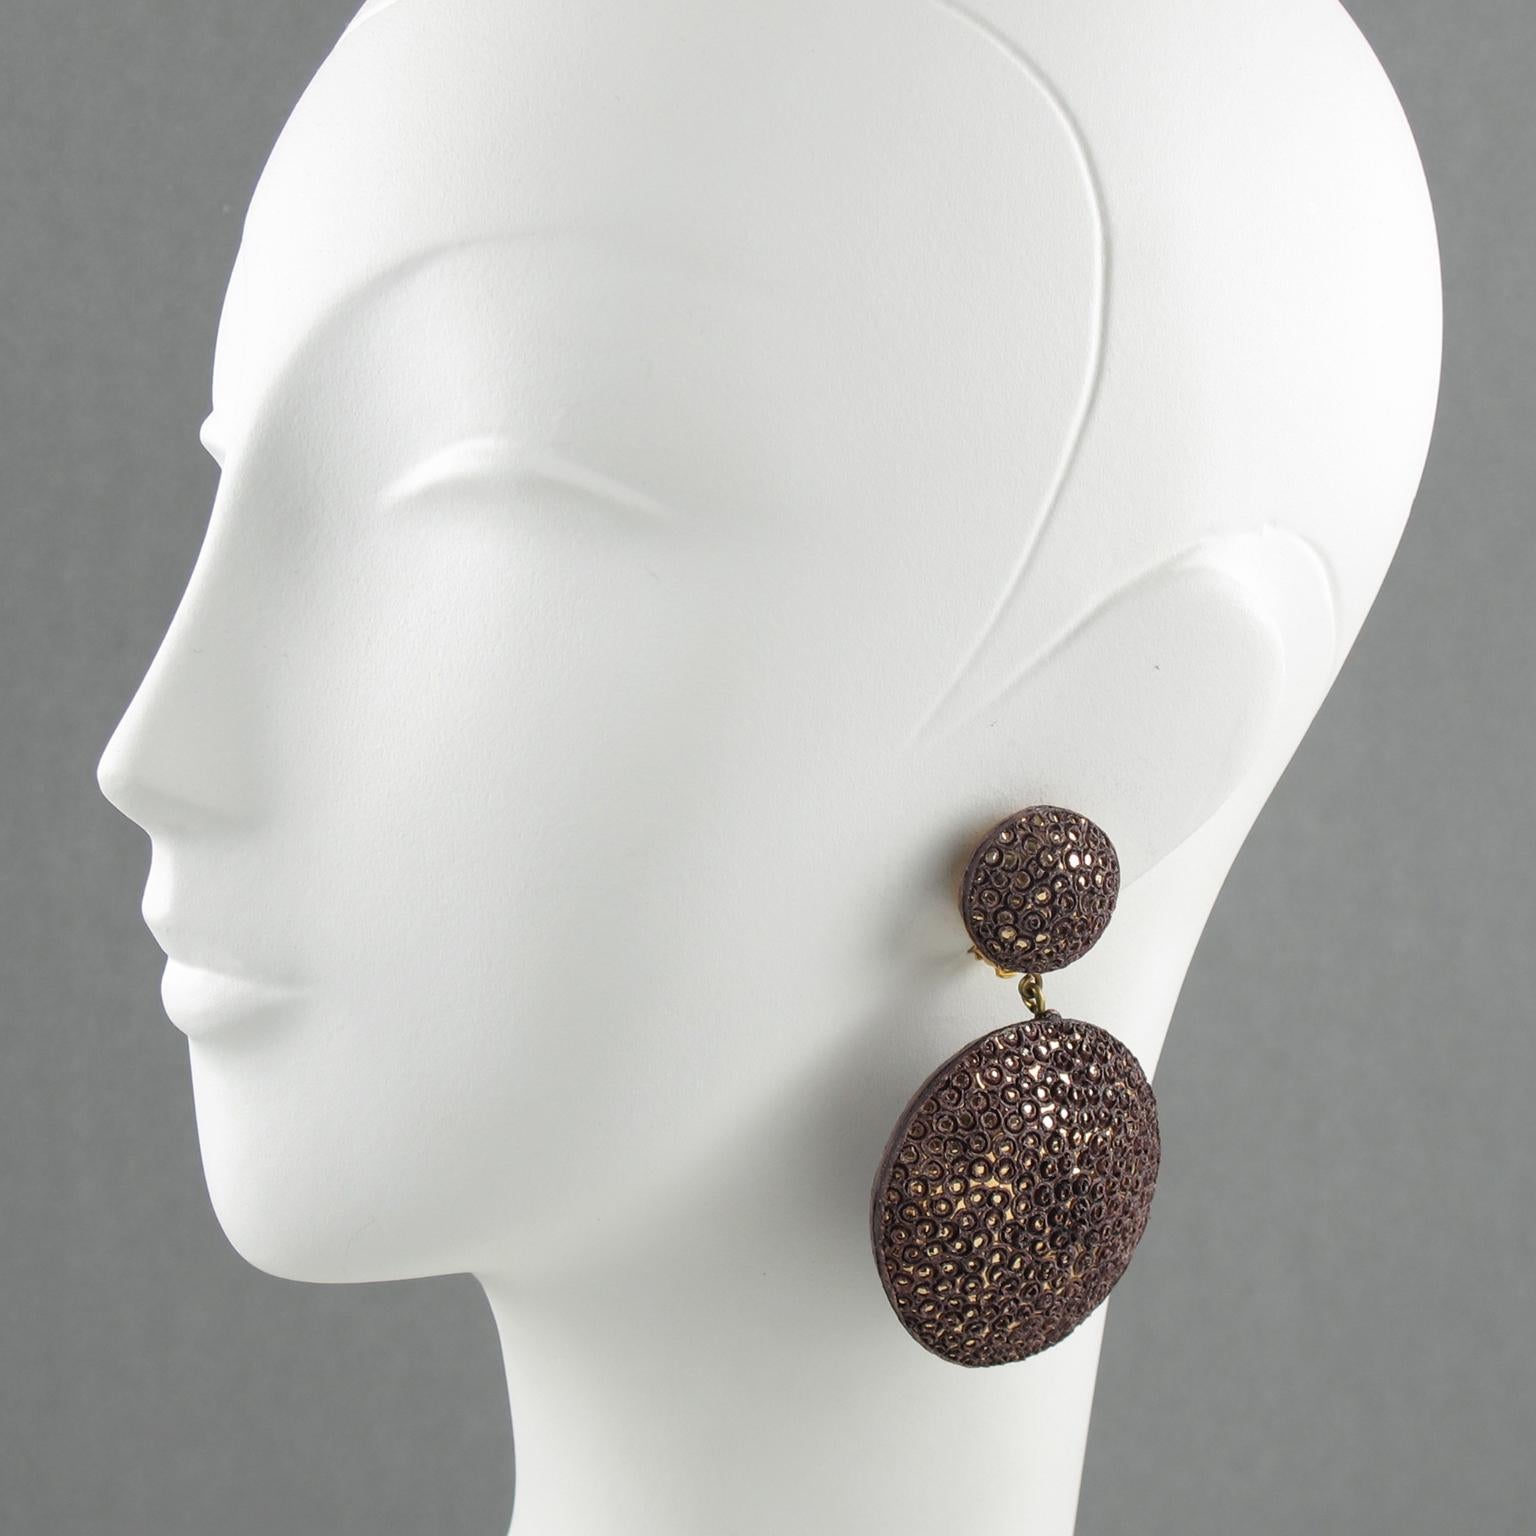 Lovely resin clip-on earrings by Fabrice, Paris. Completely handmade, each piece is unique. Oversized dangling dimensional geometric hand raised shape with detailing in hickory taupe color with textured pattern imitating shagreen. Signed at the